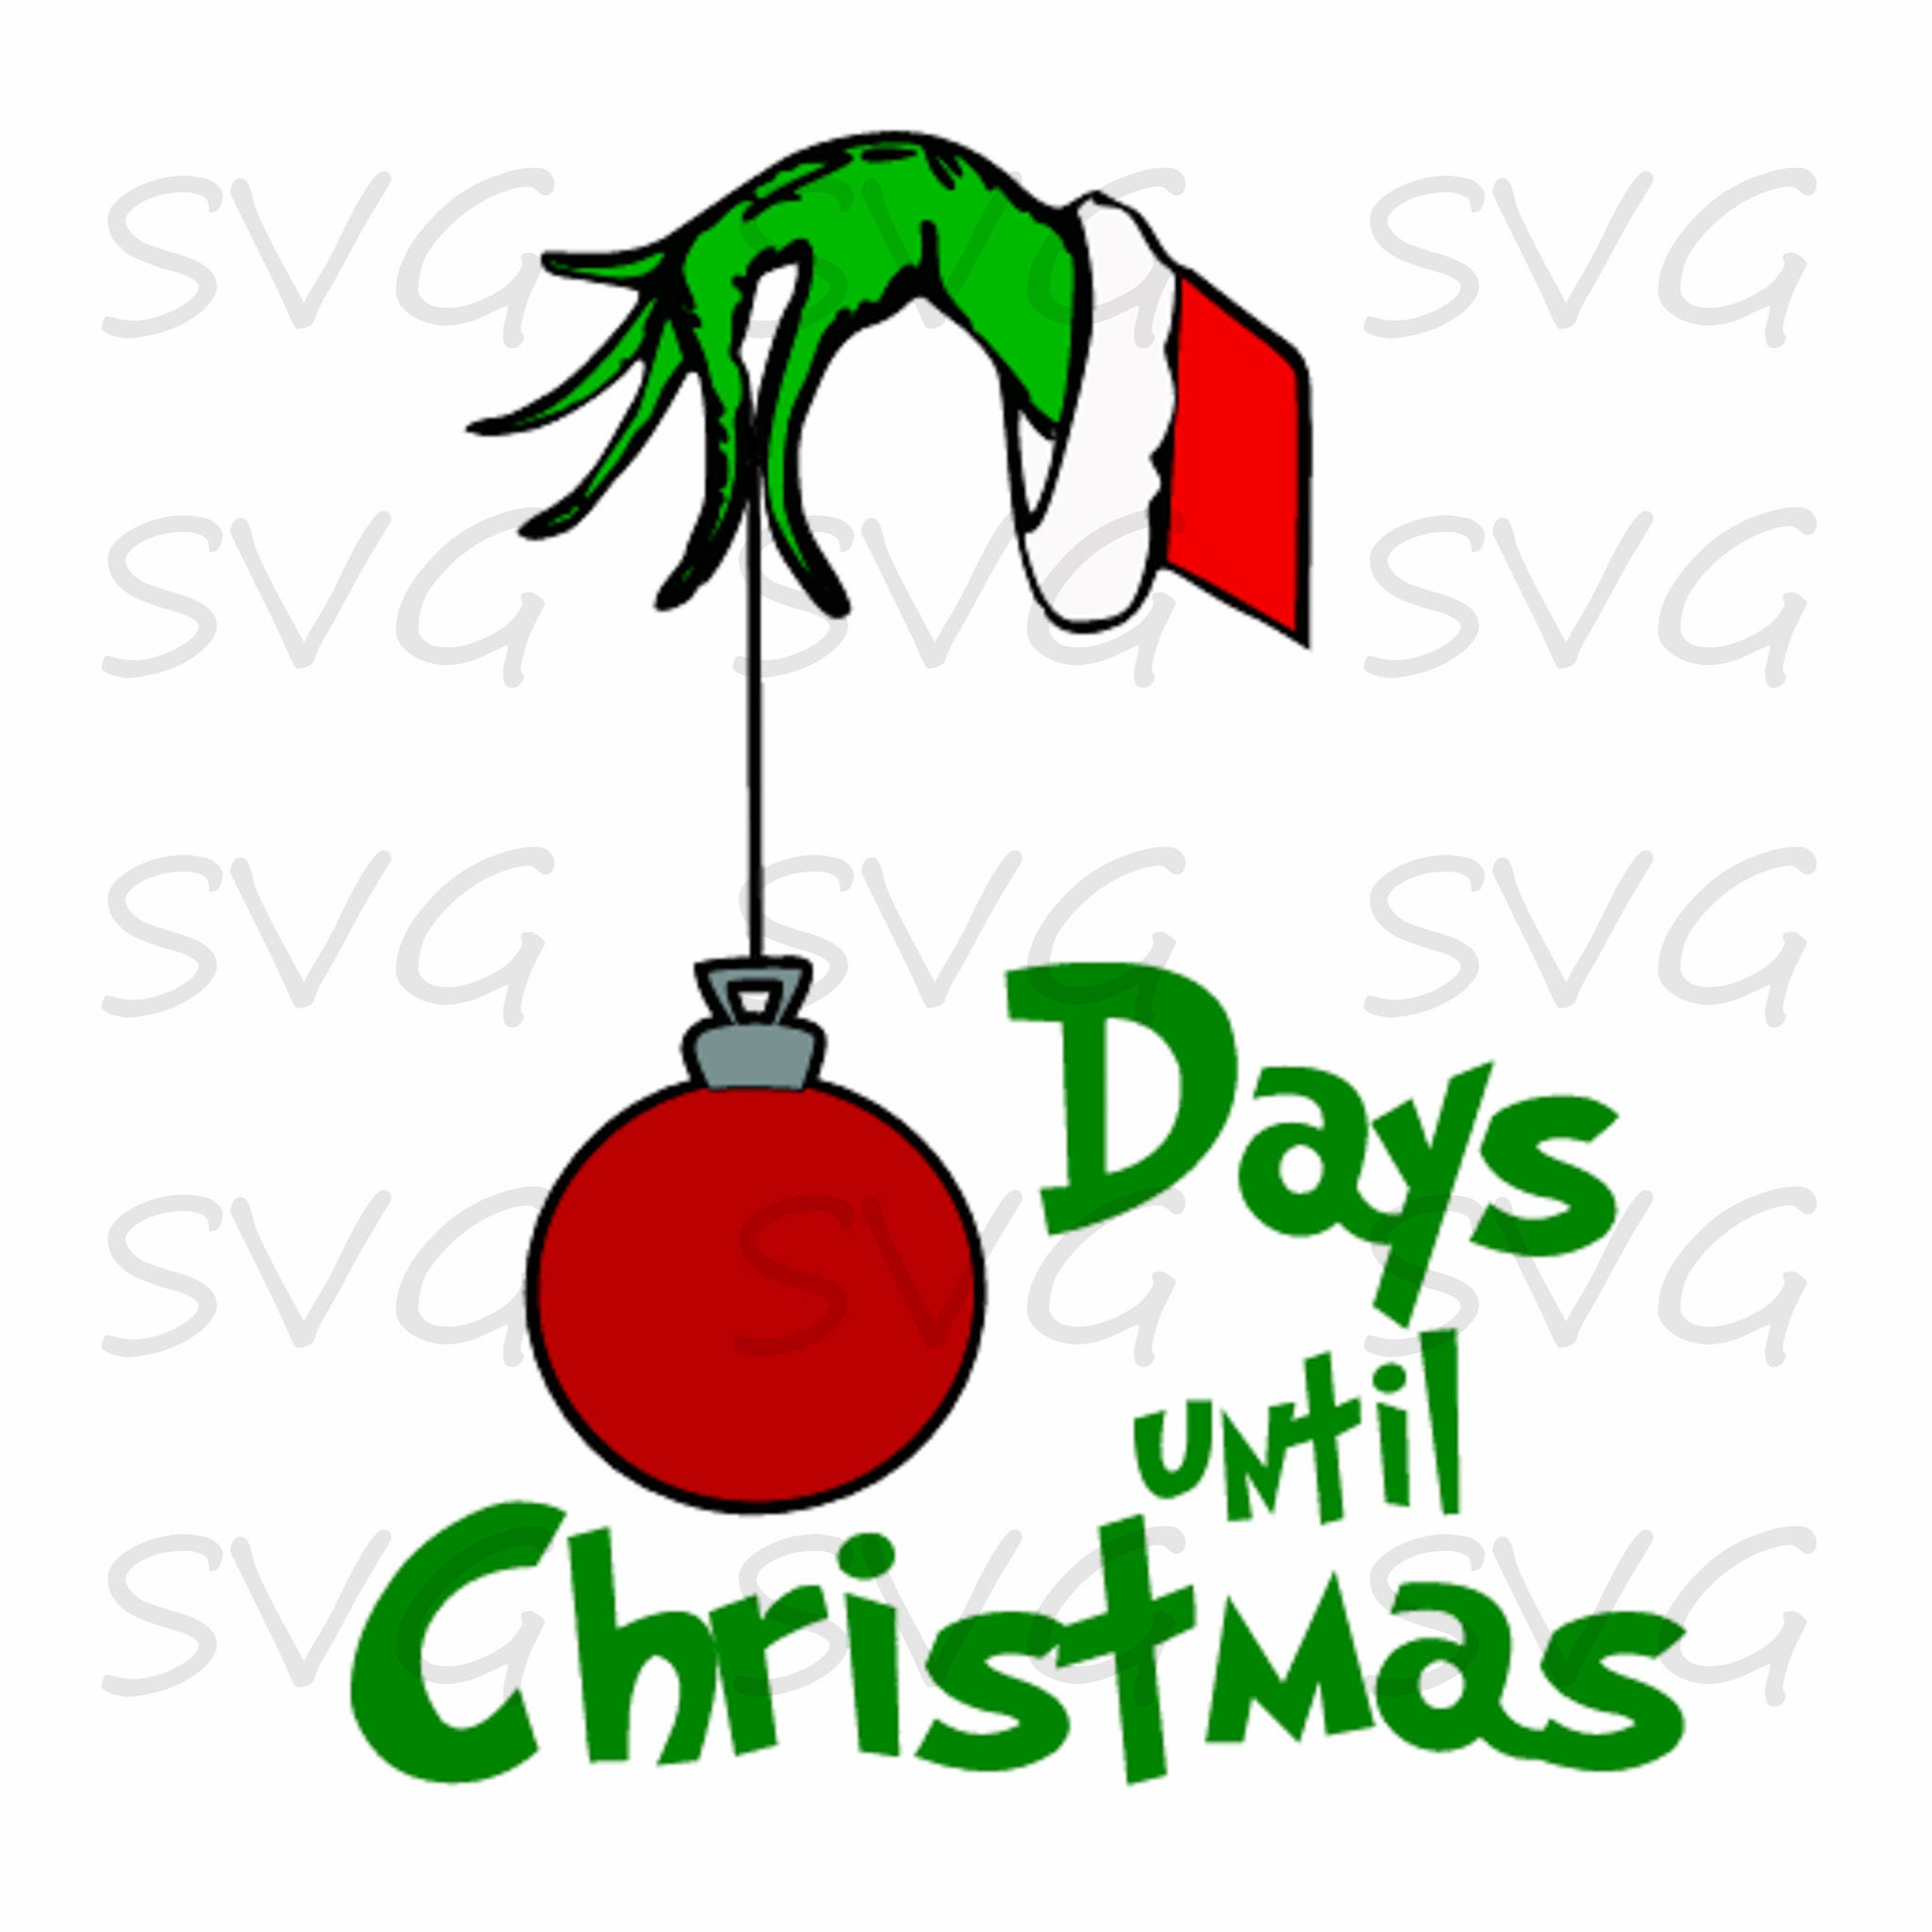 Download Grinch Day Until Christmas SVG